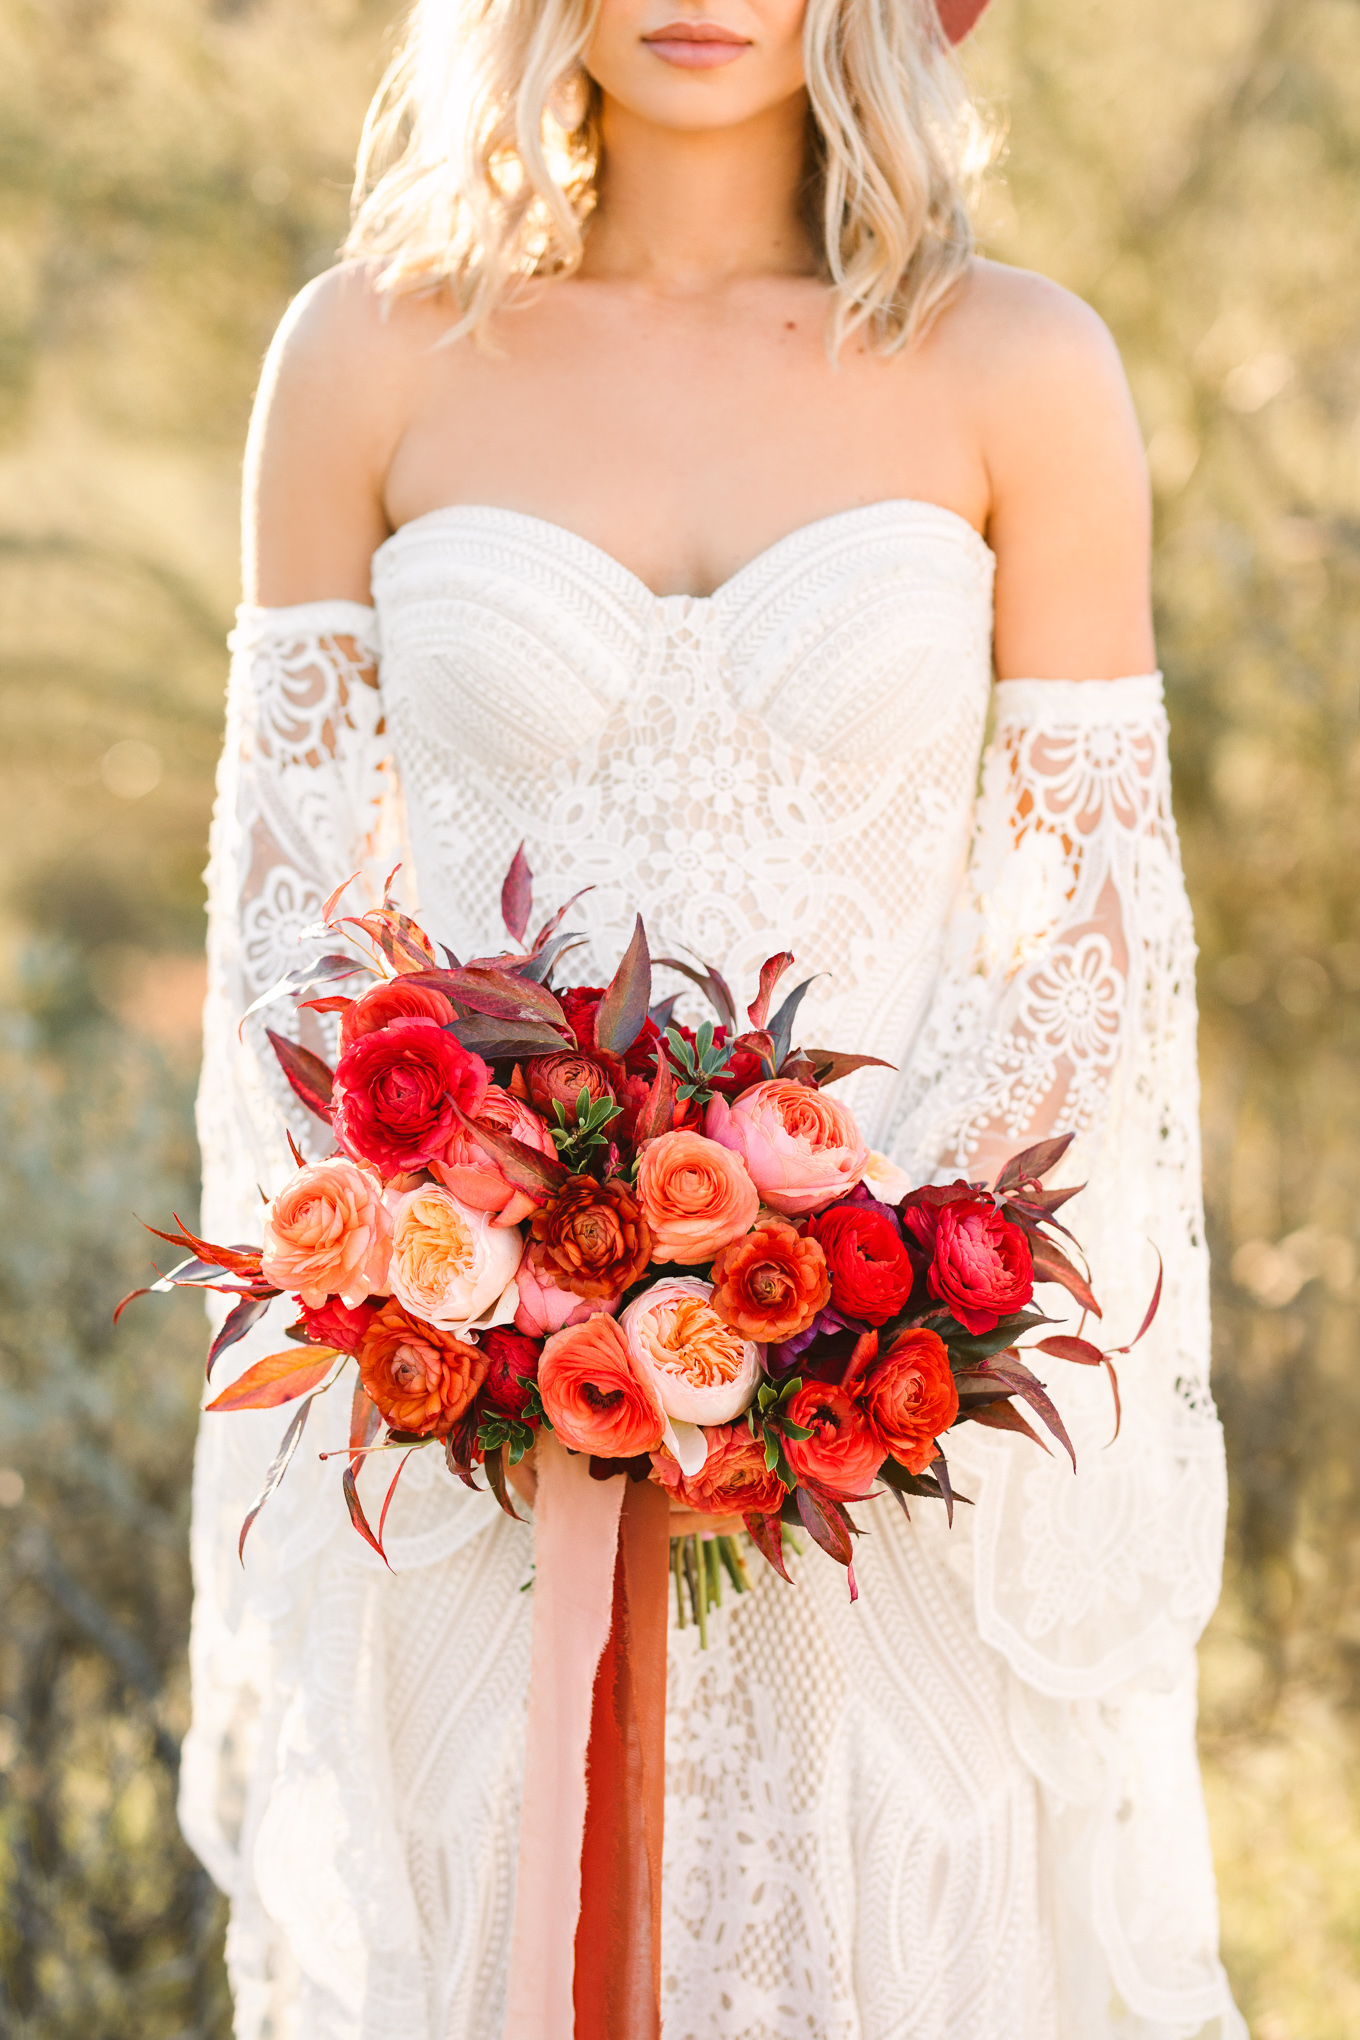 Red colorful boho wedding flowers | Beautiful bridal bouquet inspiration and advice | Colorful and elevated wedding photography for fun-loving couples in Southern California | #weddingflowers #weddingbouquet #bridebouquet #bouquetideas #uniquebouquet   Source: Mary Costa Photography | Los Angeles